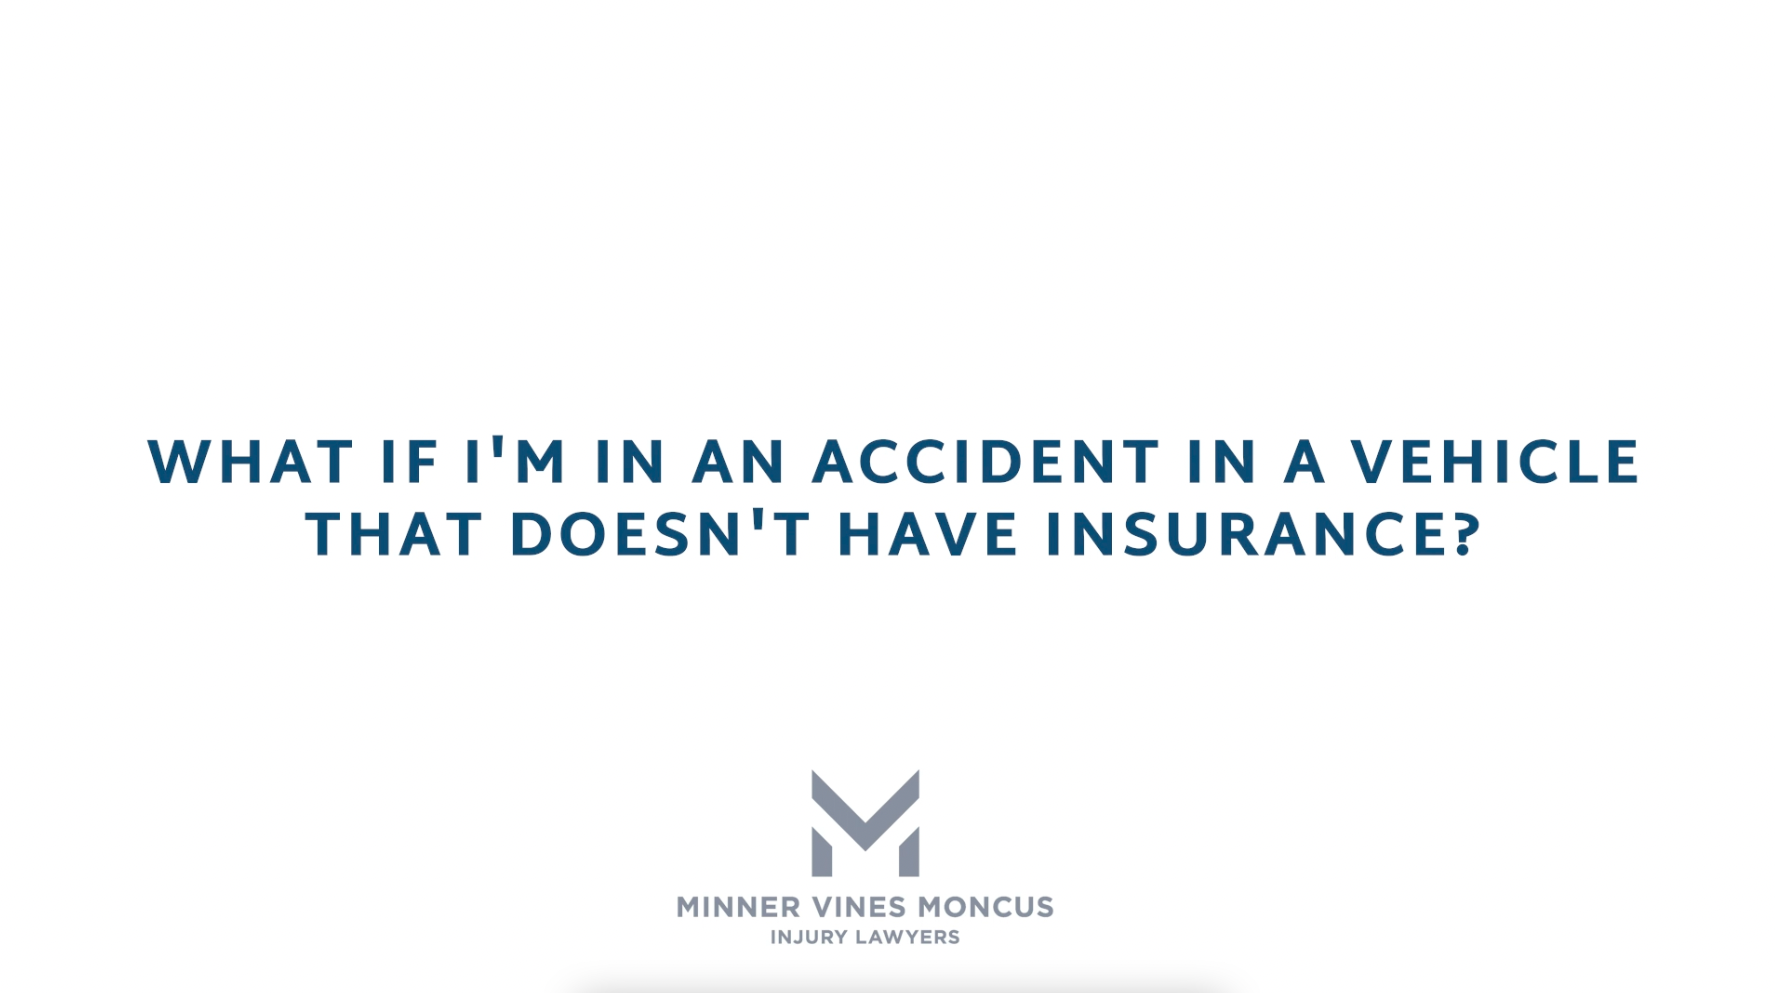 What if I’m in an accident in a vehicle that doesn’t have insurance?